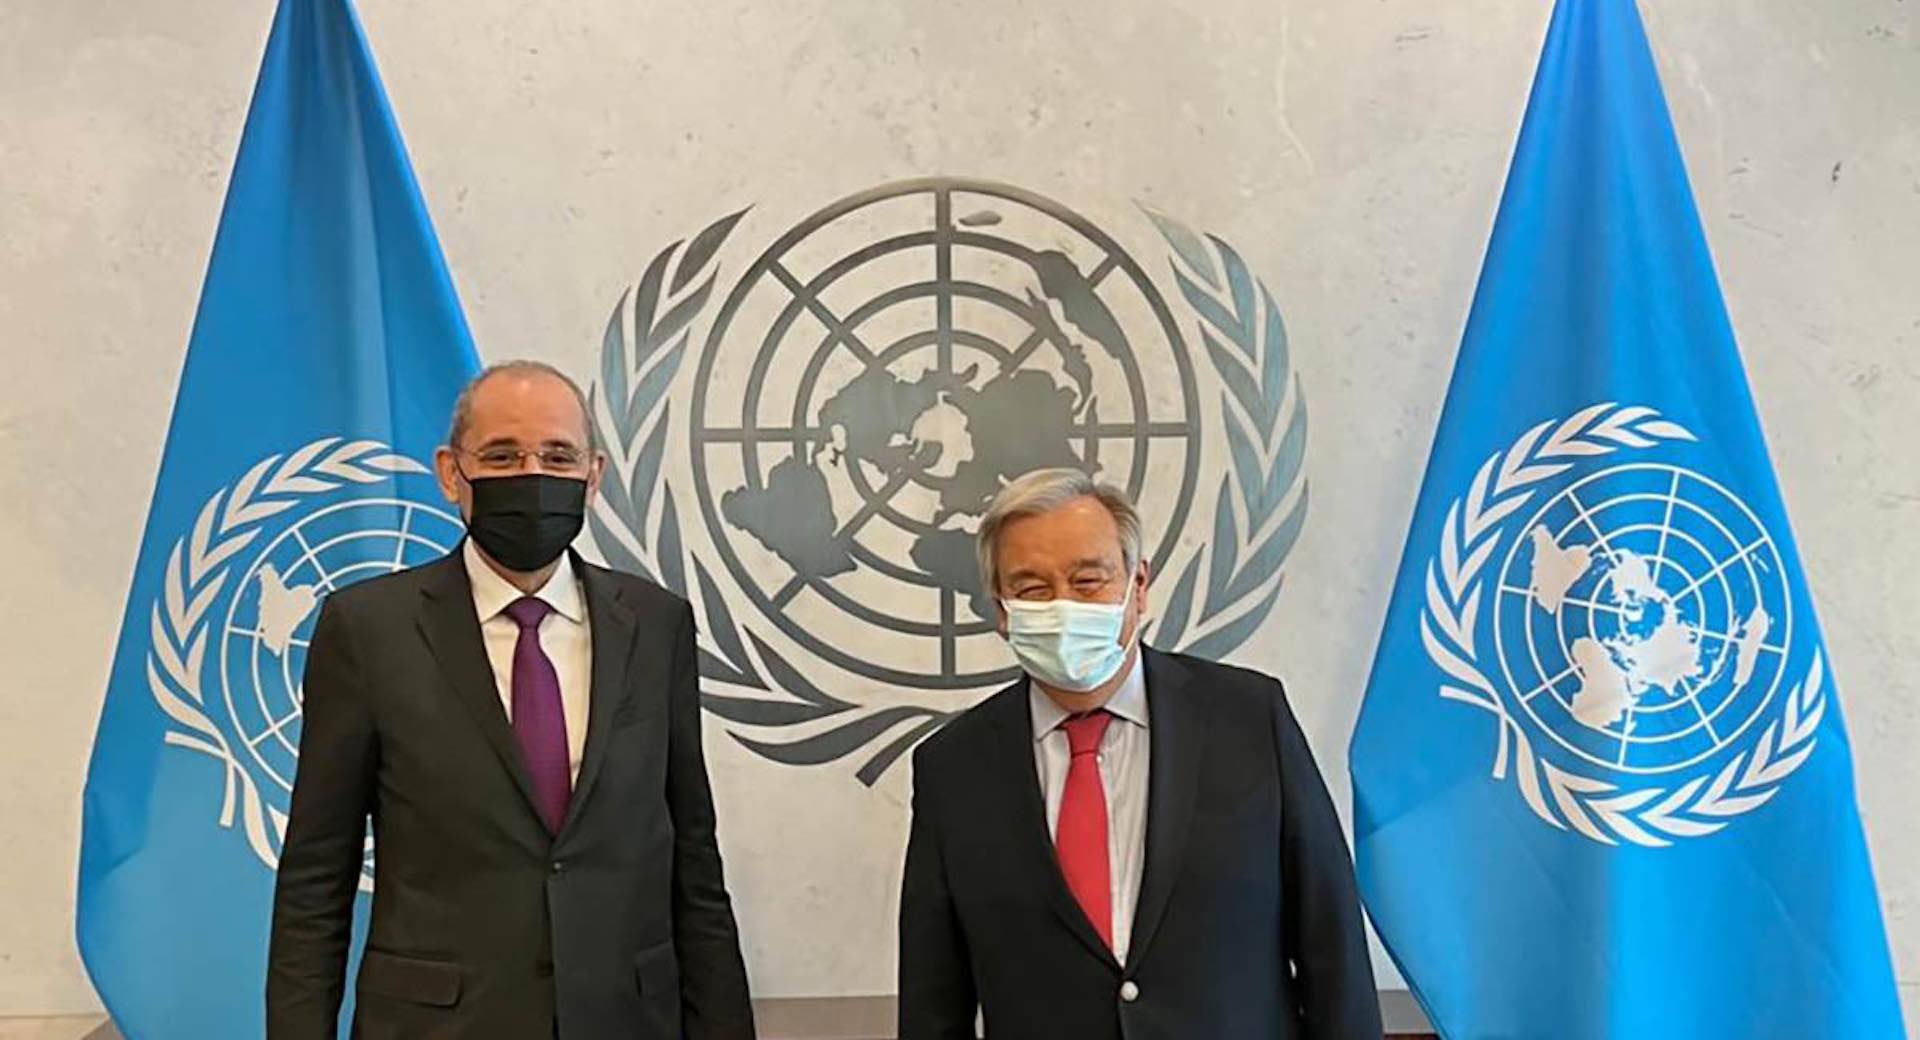 Safadi and Guterres discuss partnership and common challenges